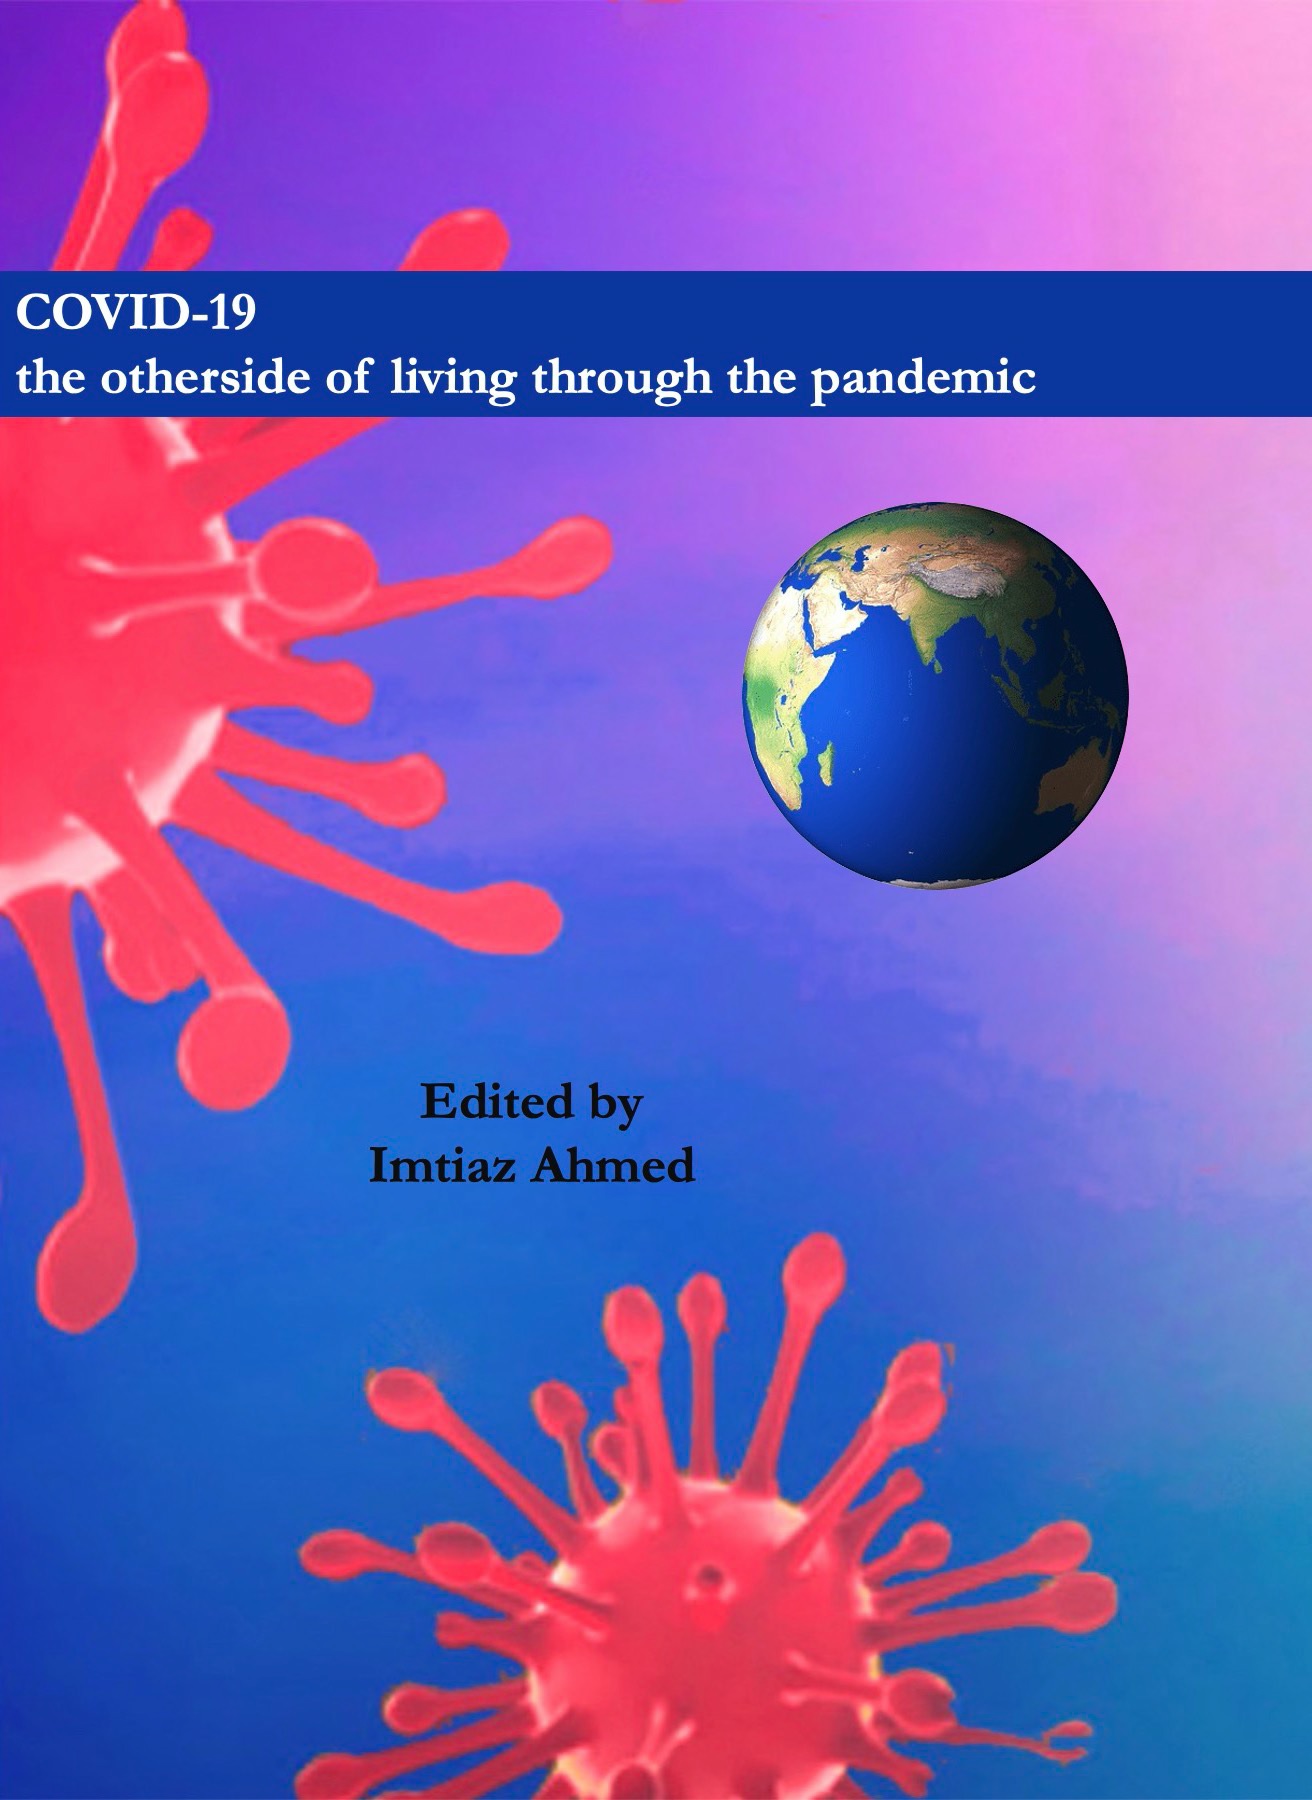 Covid-19: The Other side of Living Through the Pandemic